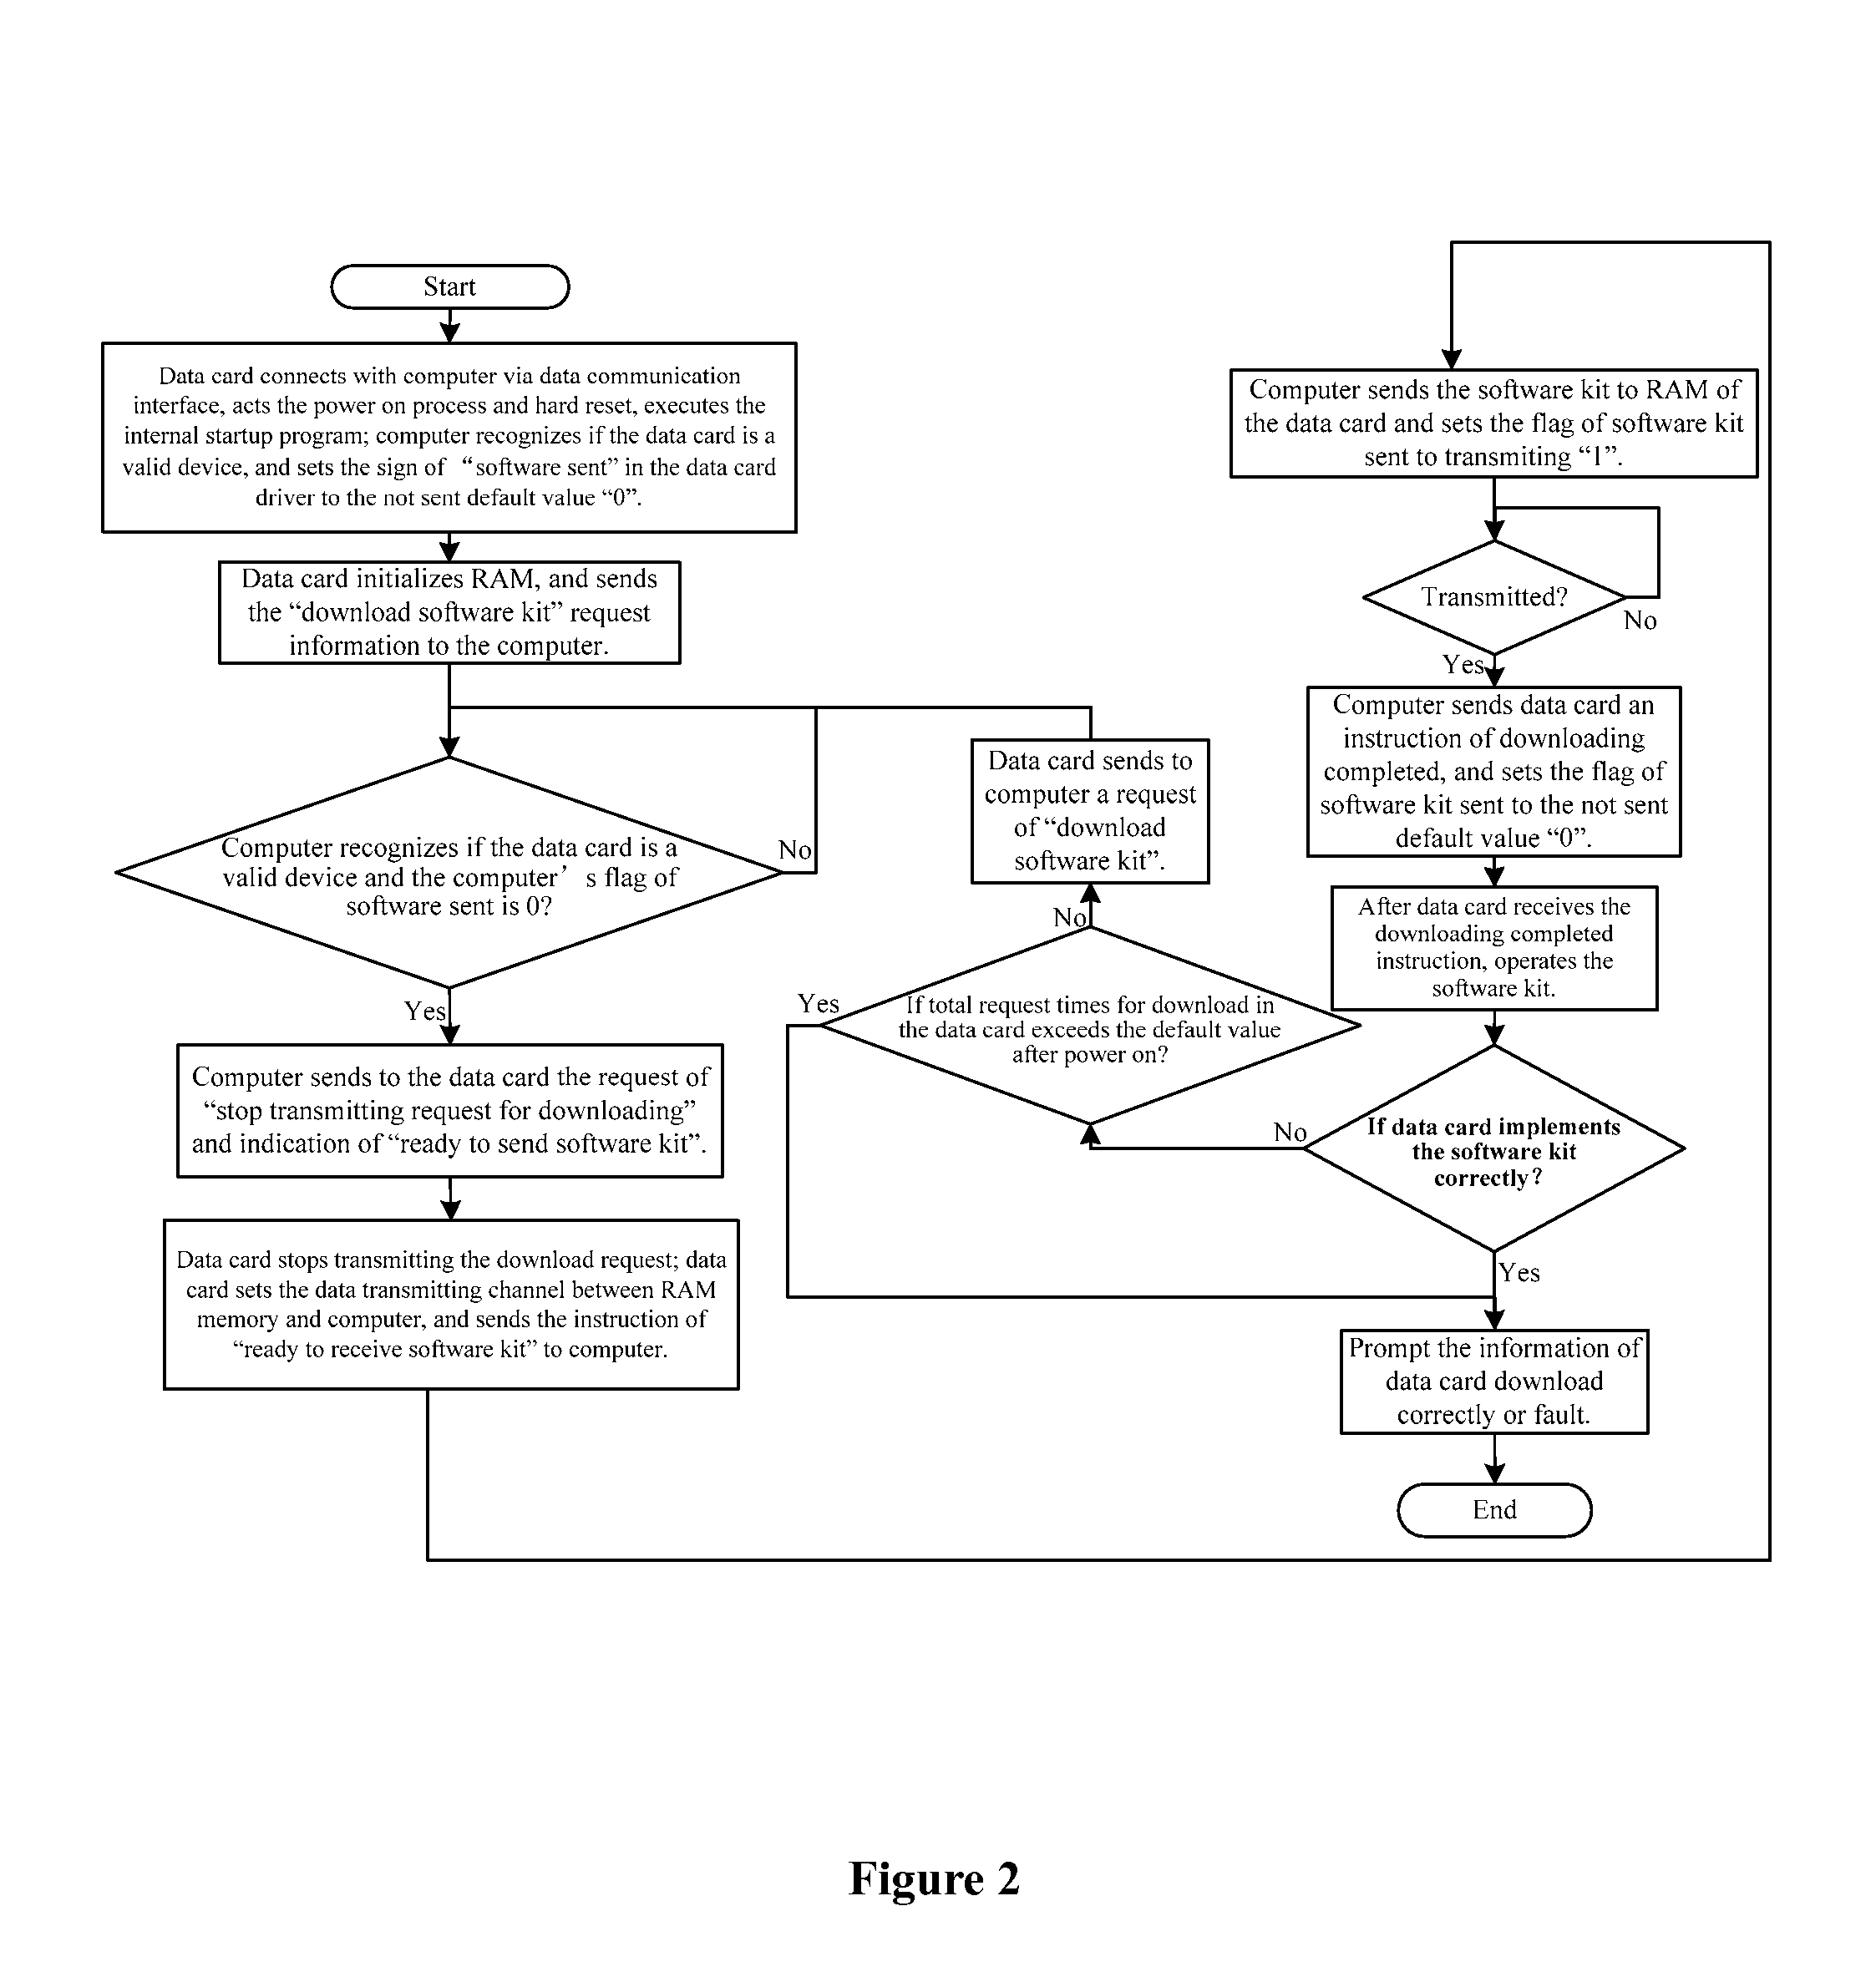 Method of Computer Based Data Card Software Downloading and Updating